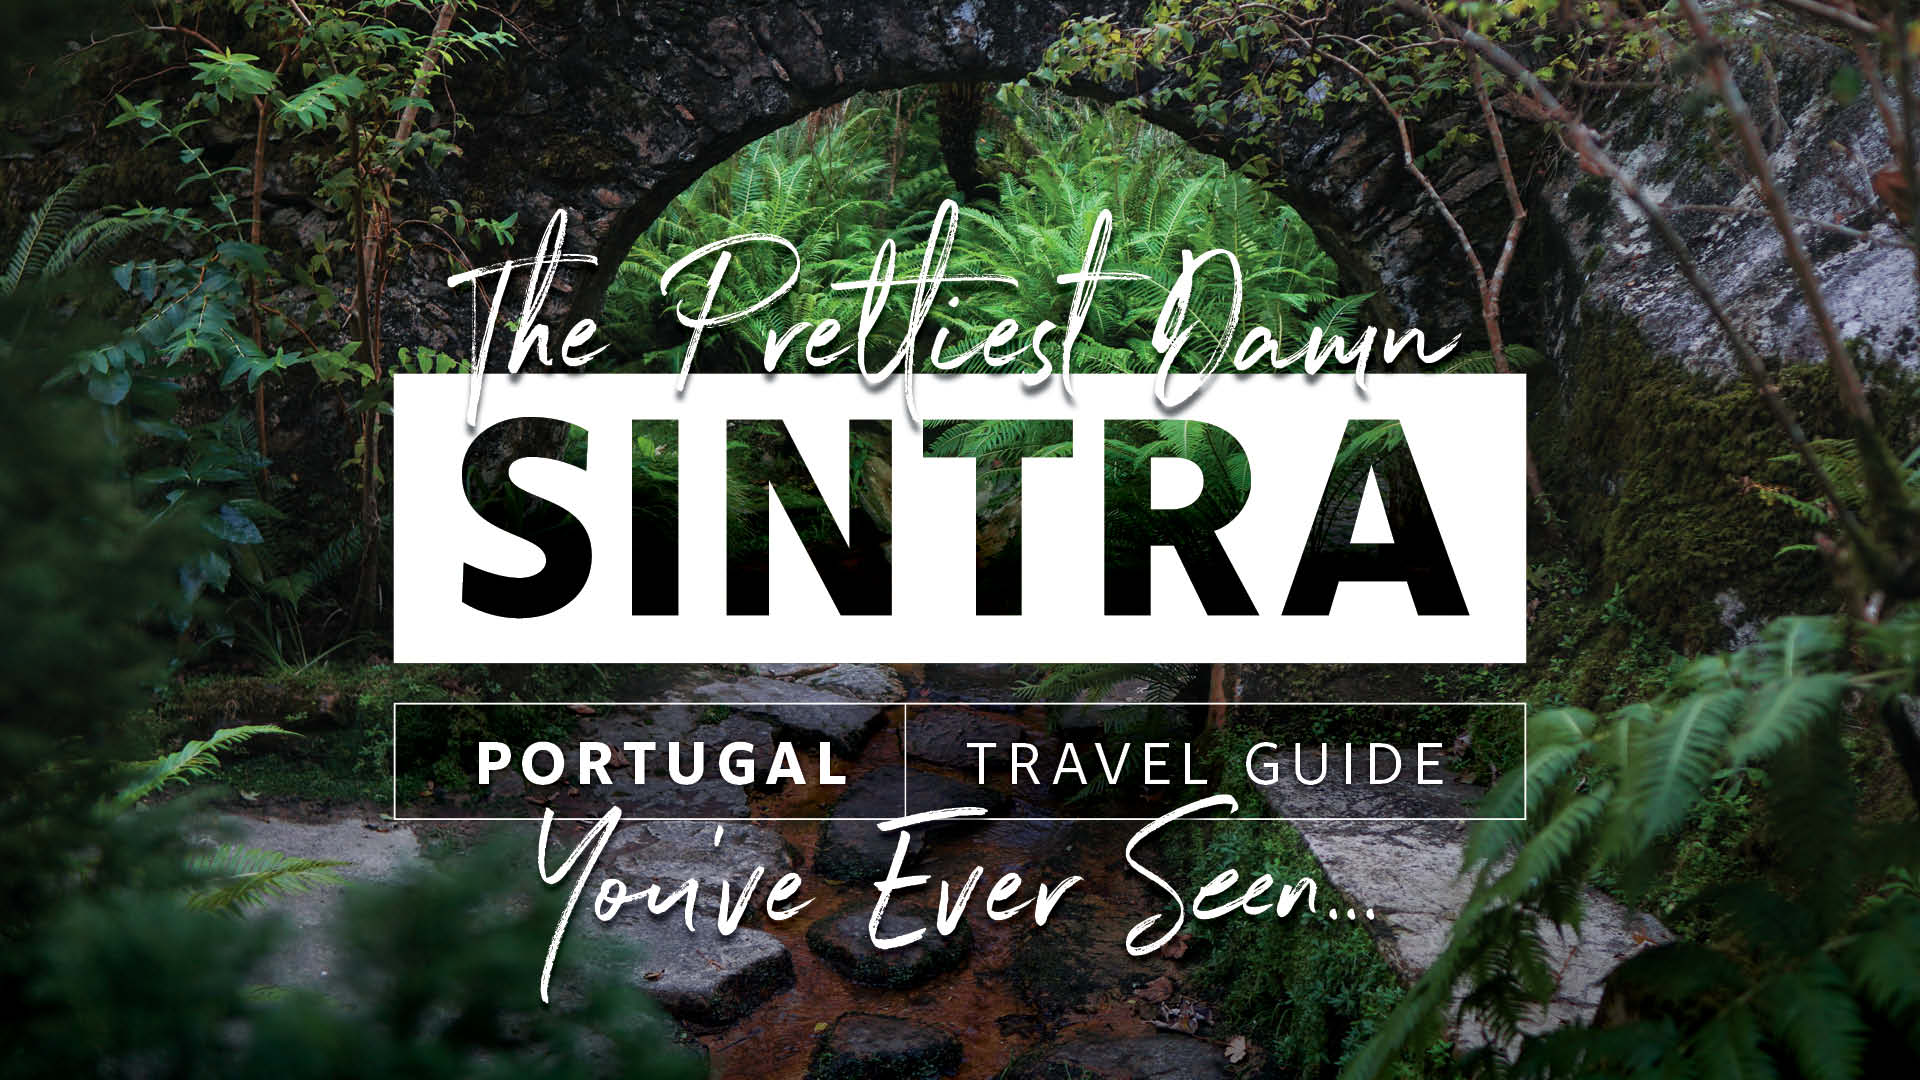 Sintra Travel Guide Portugal Cover Image Pena Palace Gardens